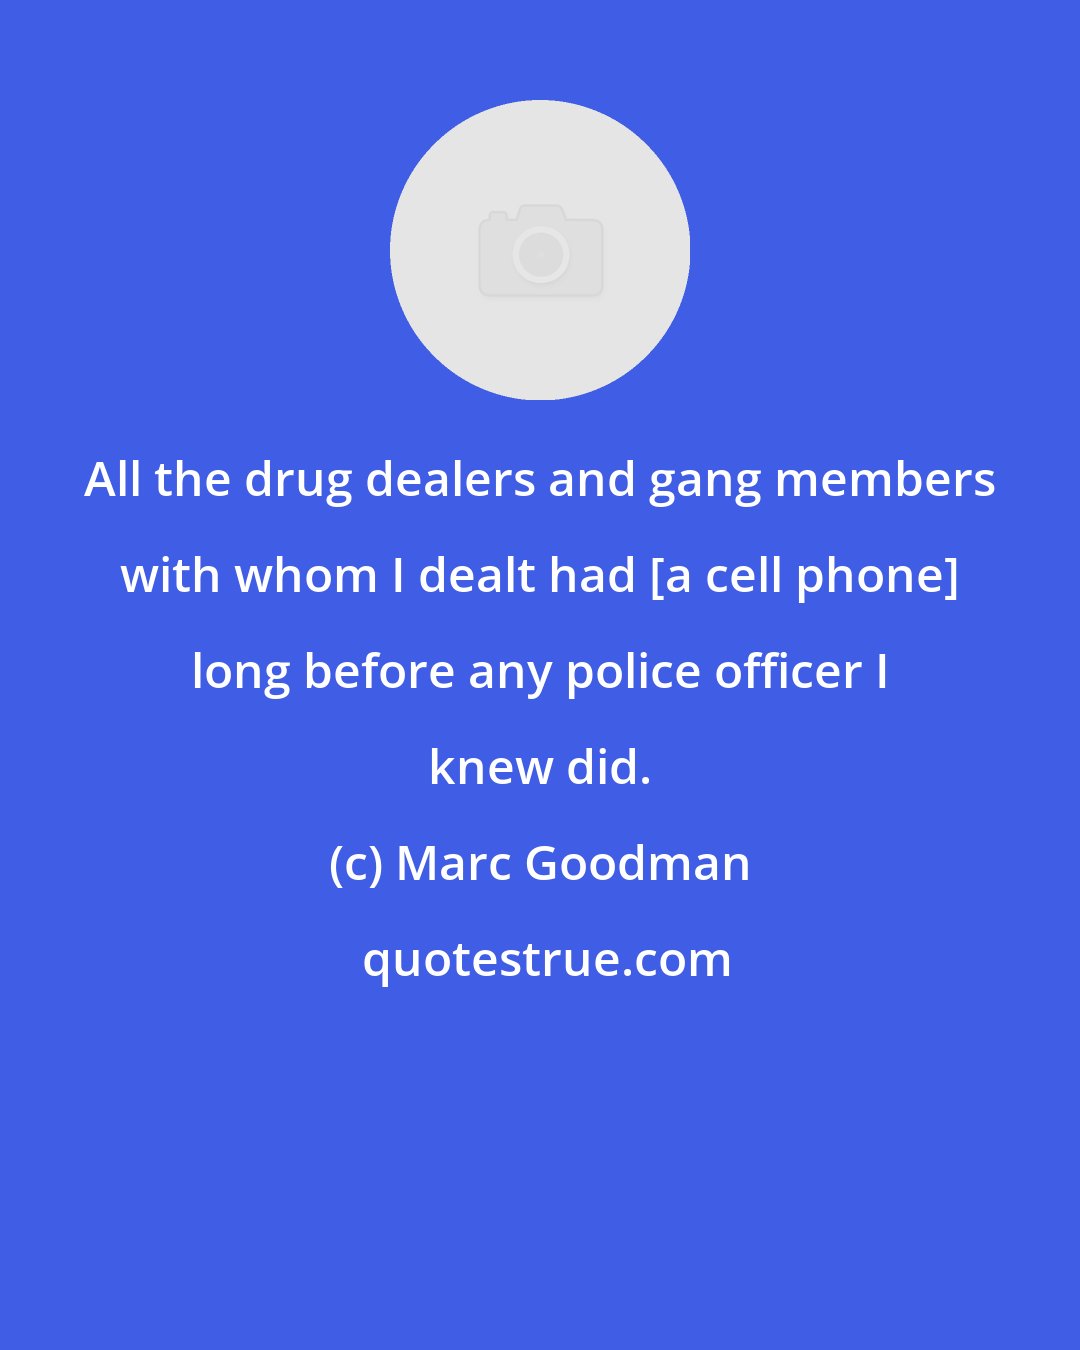 Marc Goodman: All the drug dealers and gang members with whom I dealt had [a cell phone] long before any police officer I knew did.